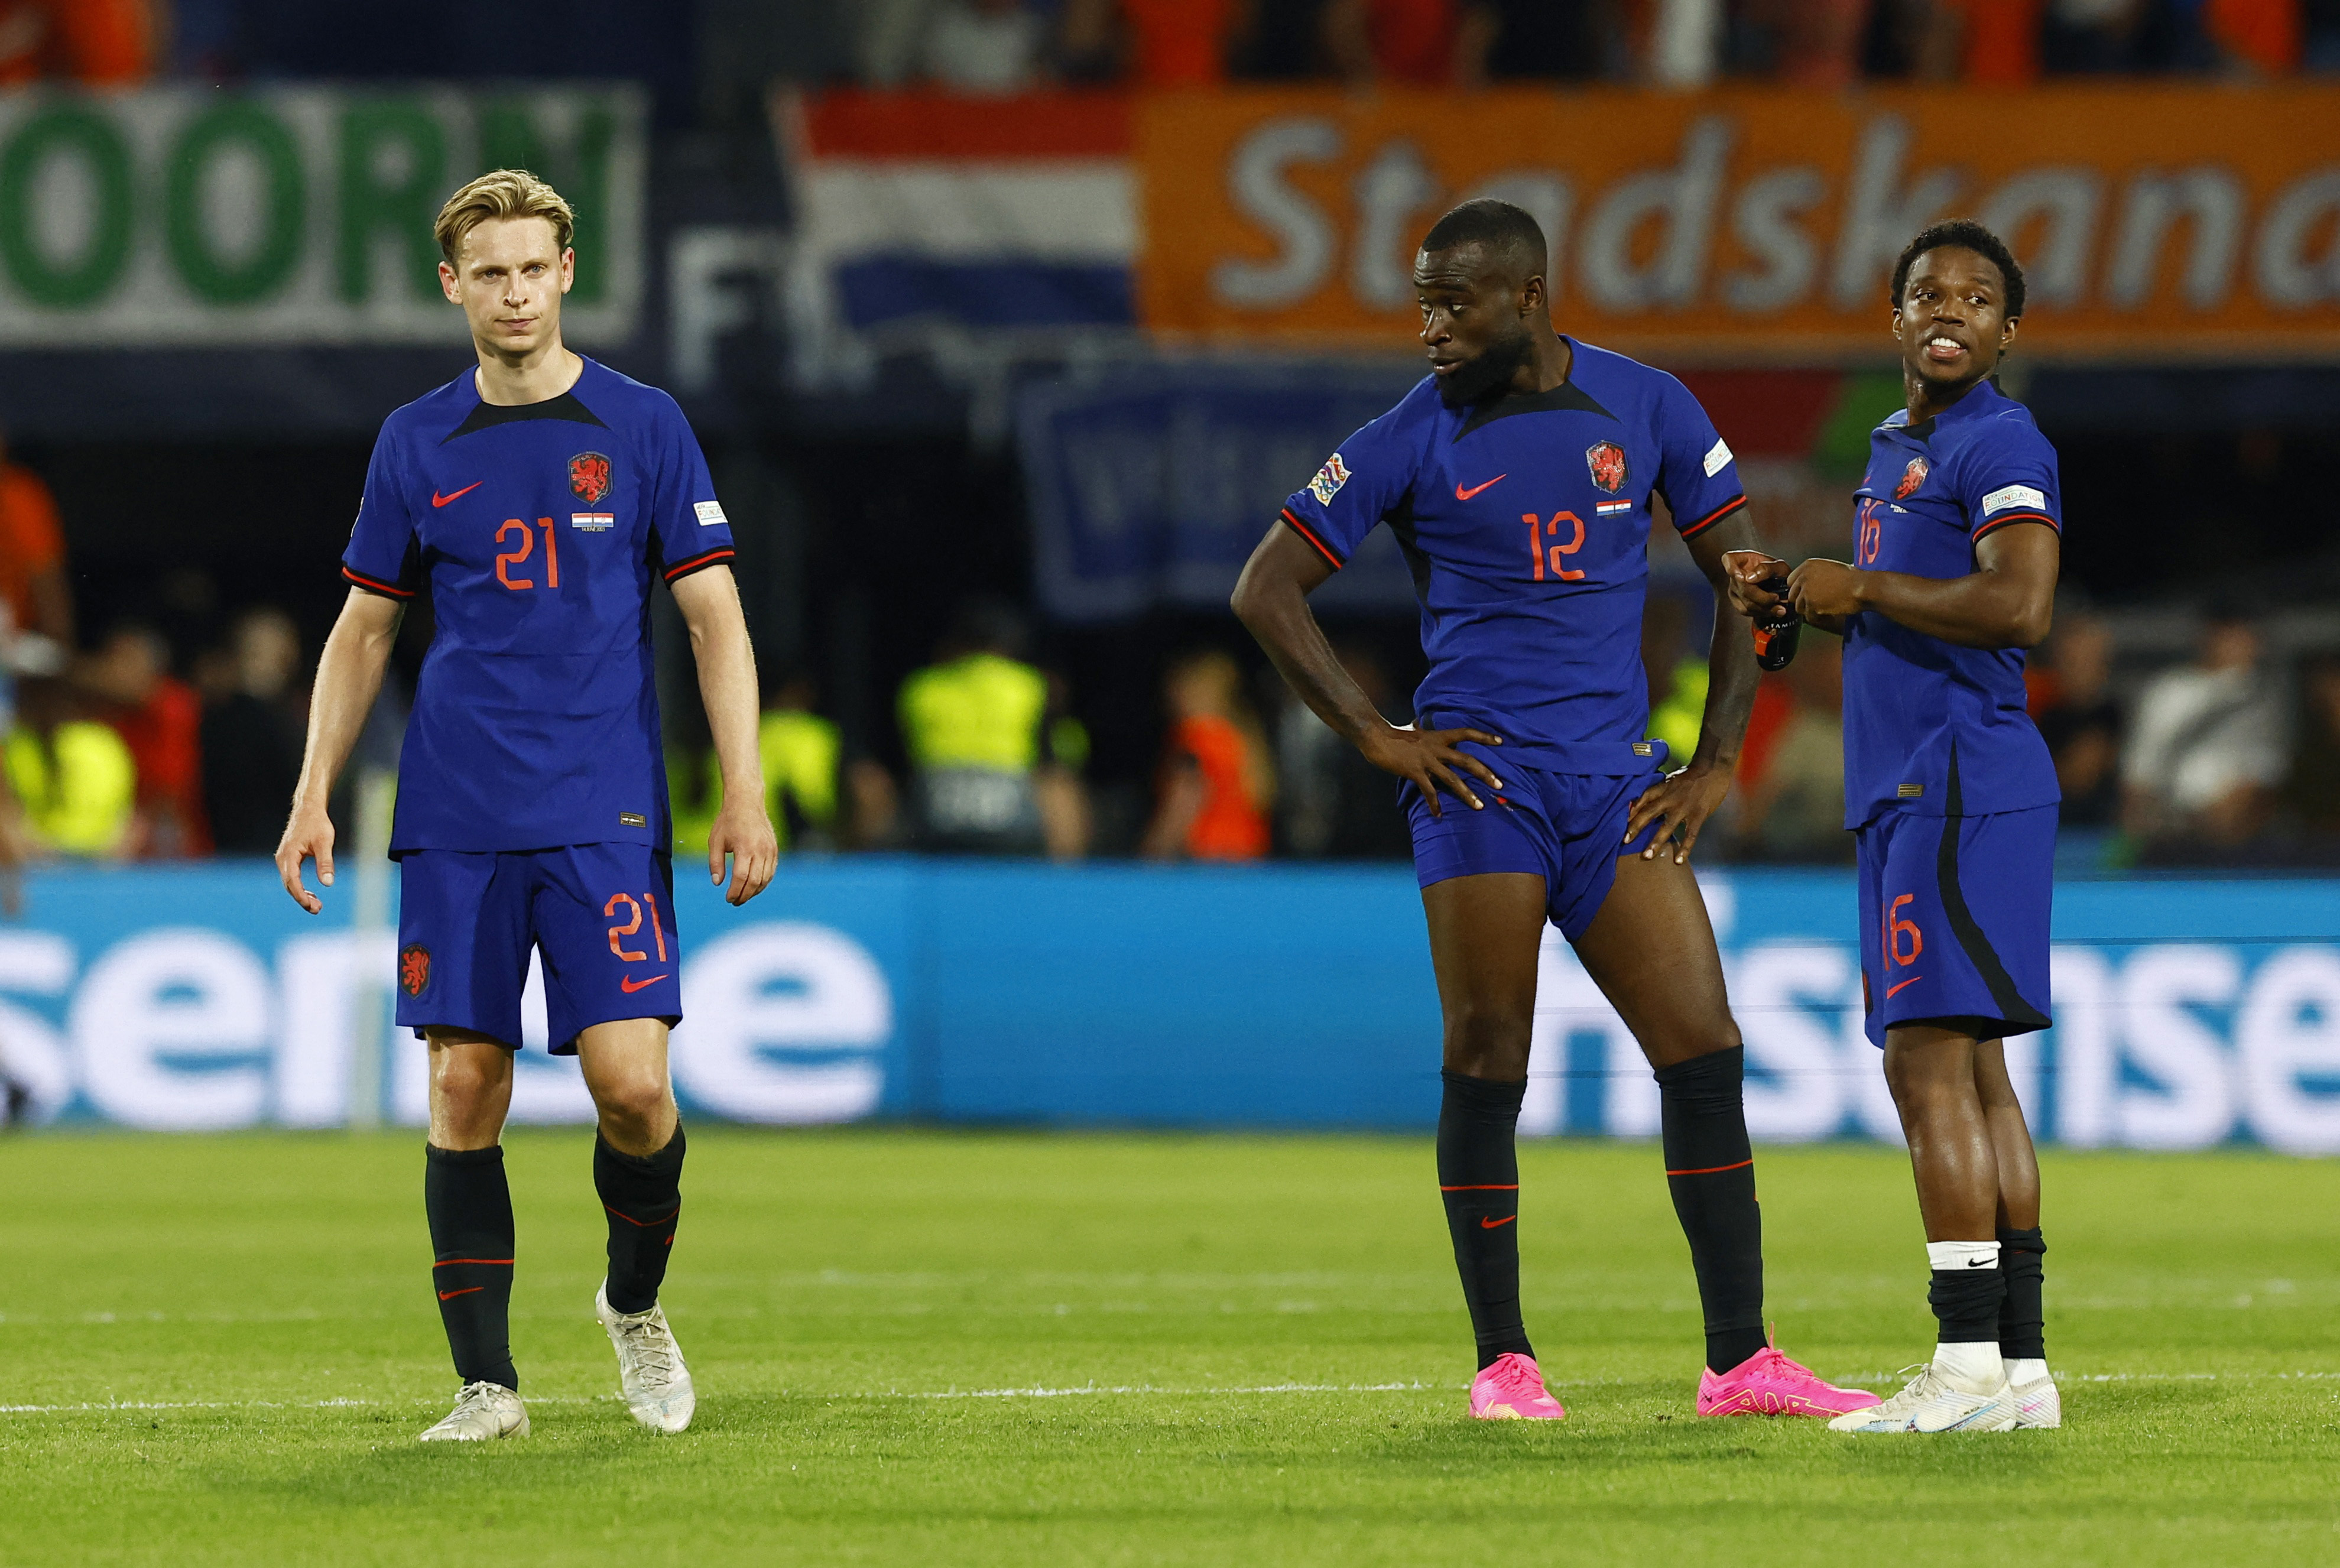 Croatia reach Nations League final after knocking out hosts Netherlands